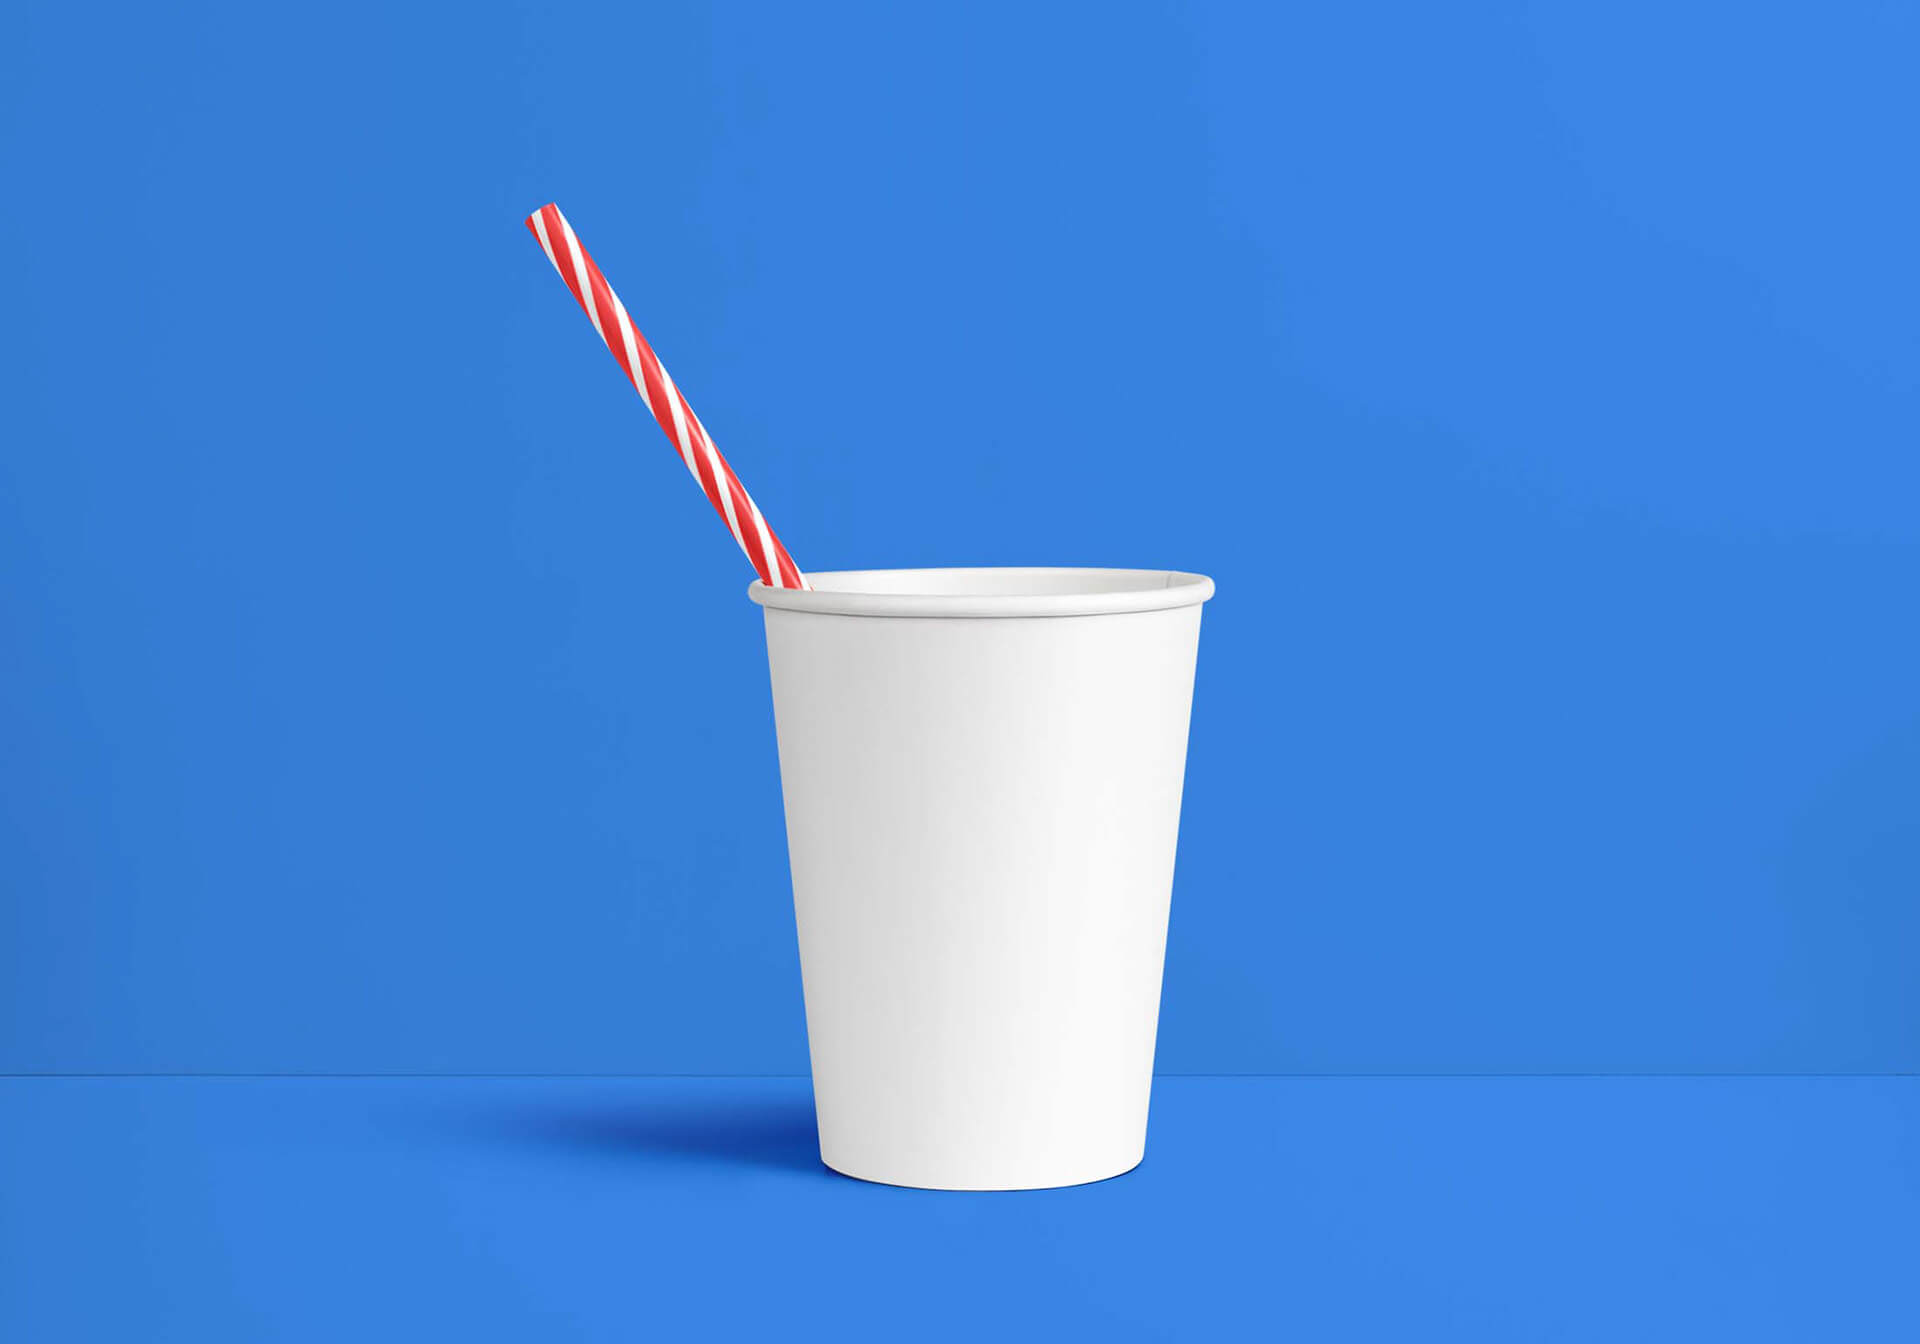 https://www.pacagemockup.com/wp-content/uploads/2022/12/Free-Paper-Cup-Mockup-With-Straw1.jpg